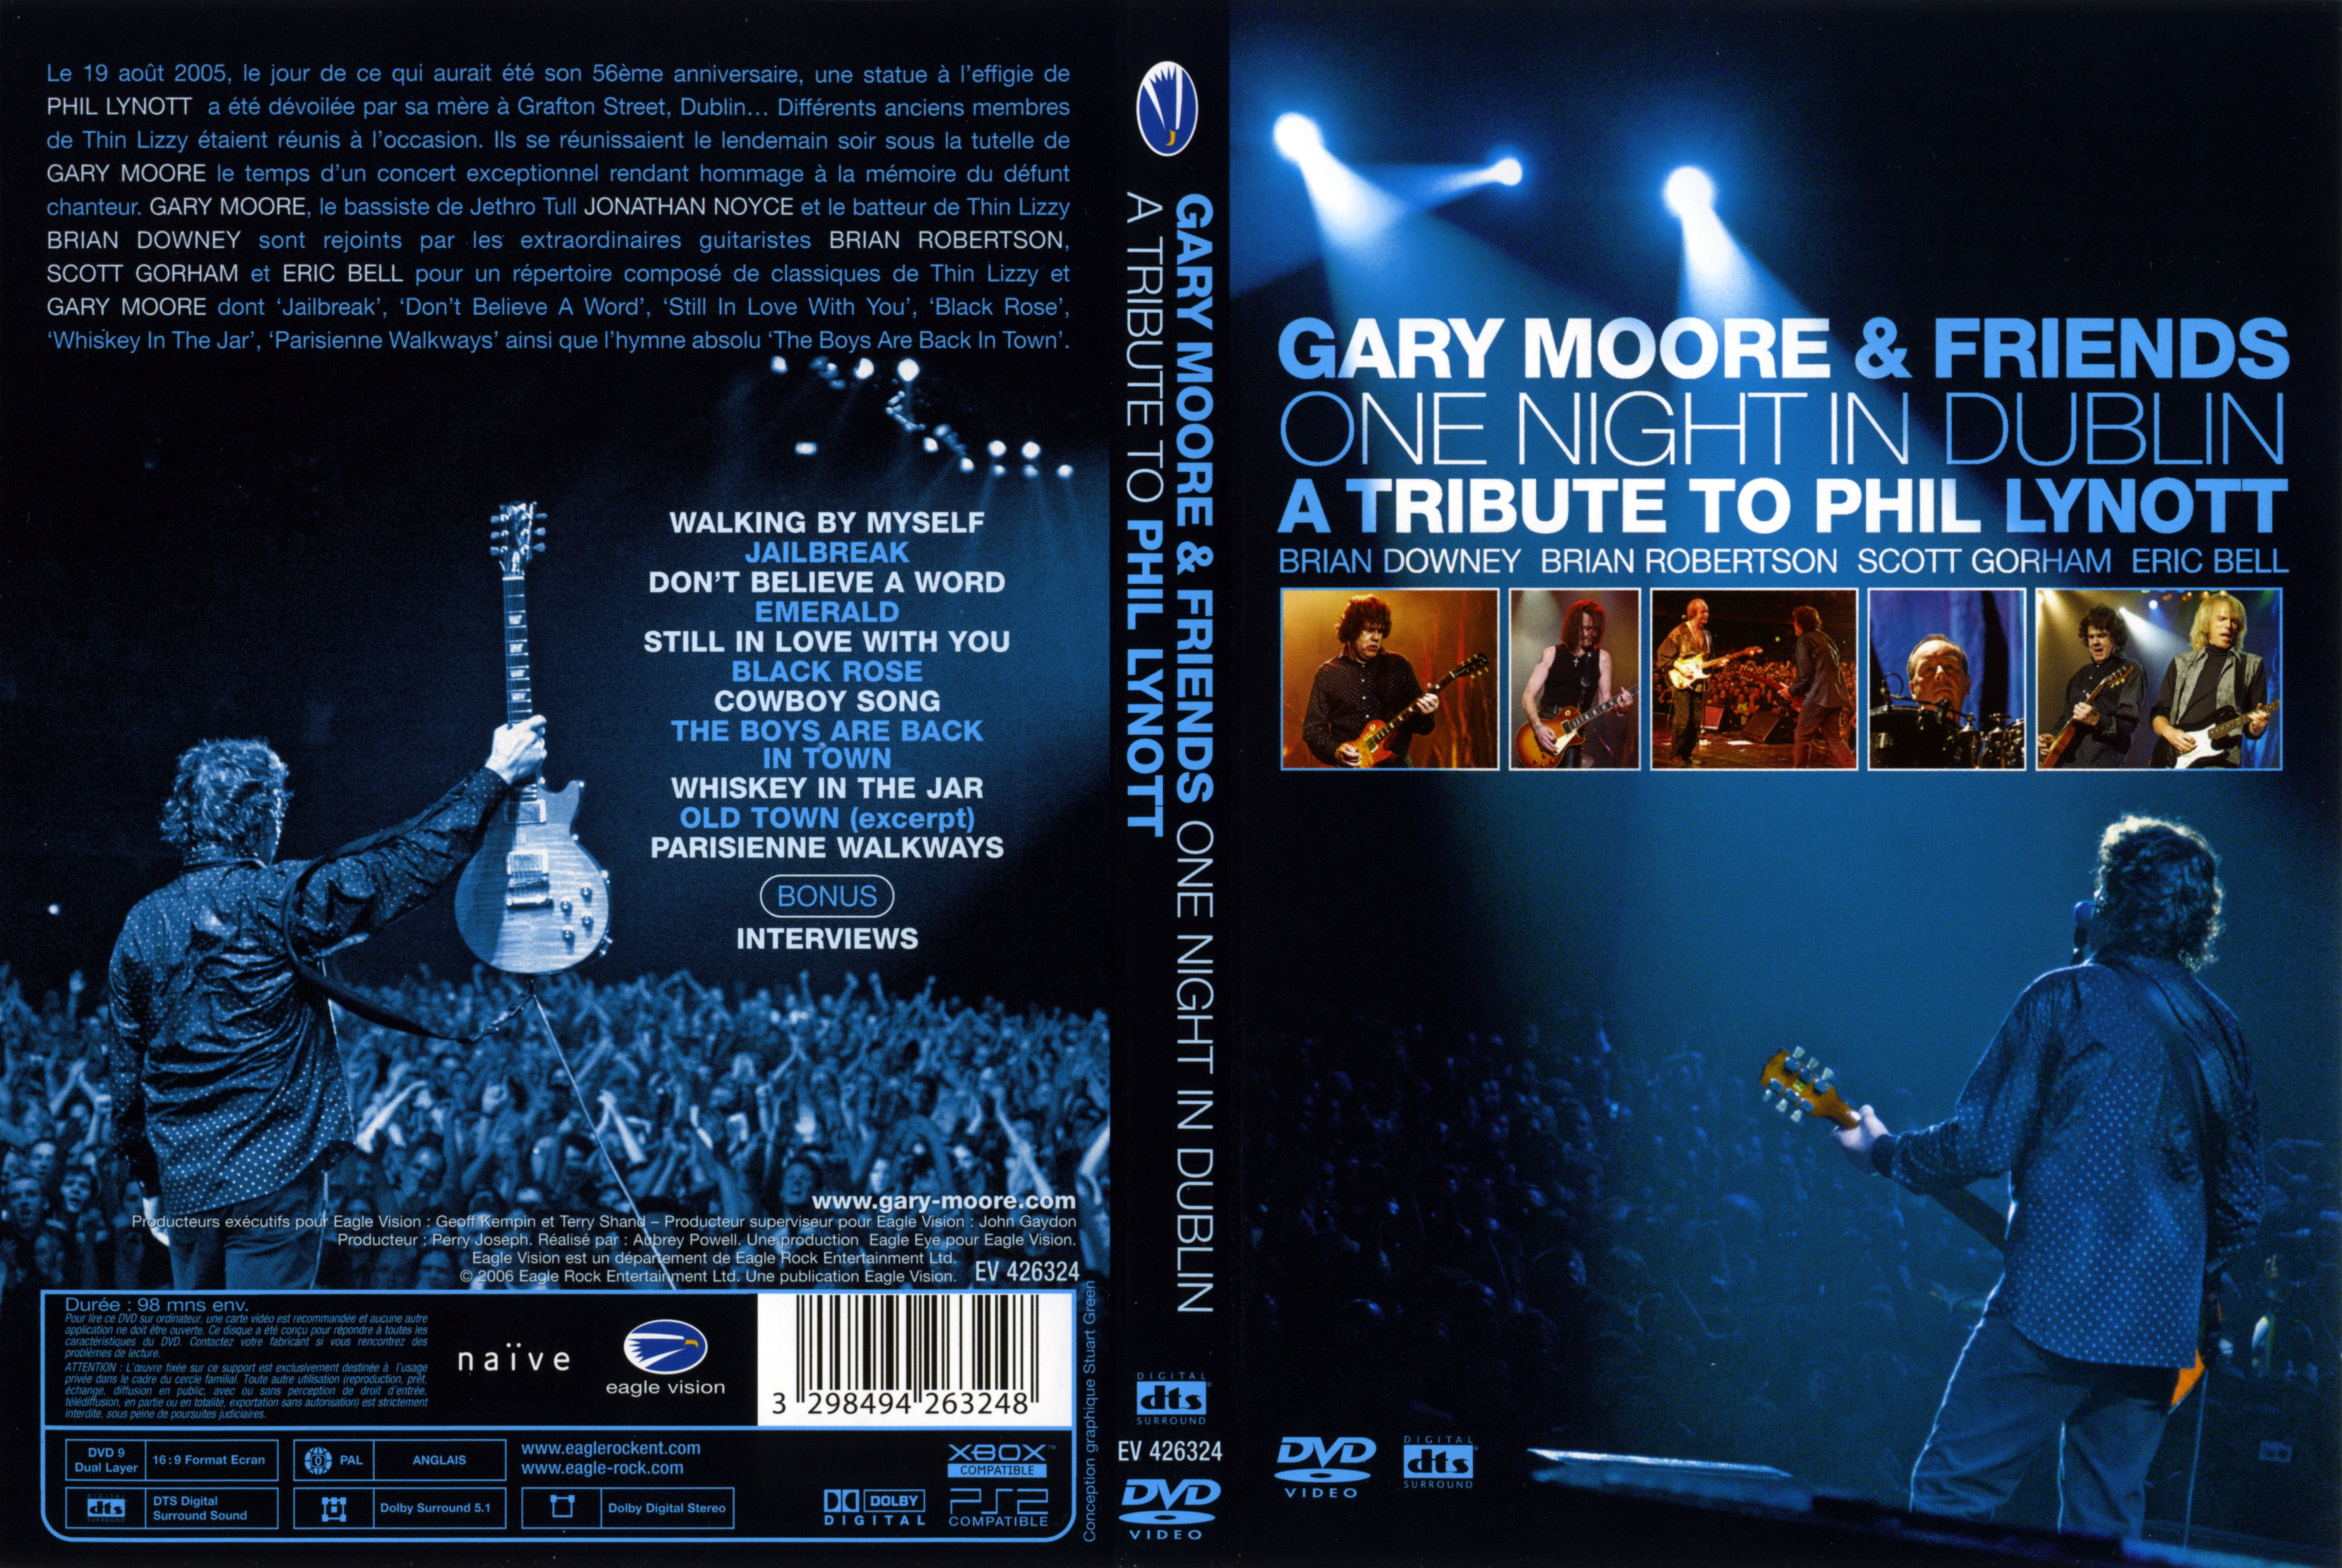 Jaquette DVD Gary Moore One night in Dublin